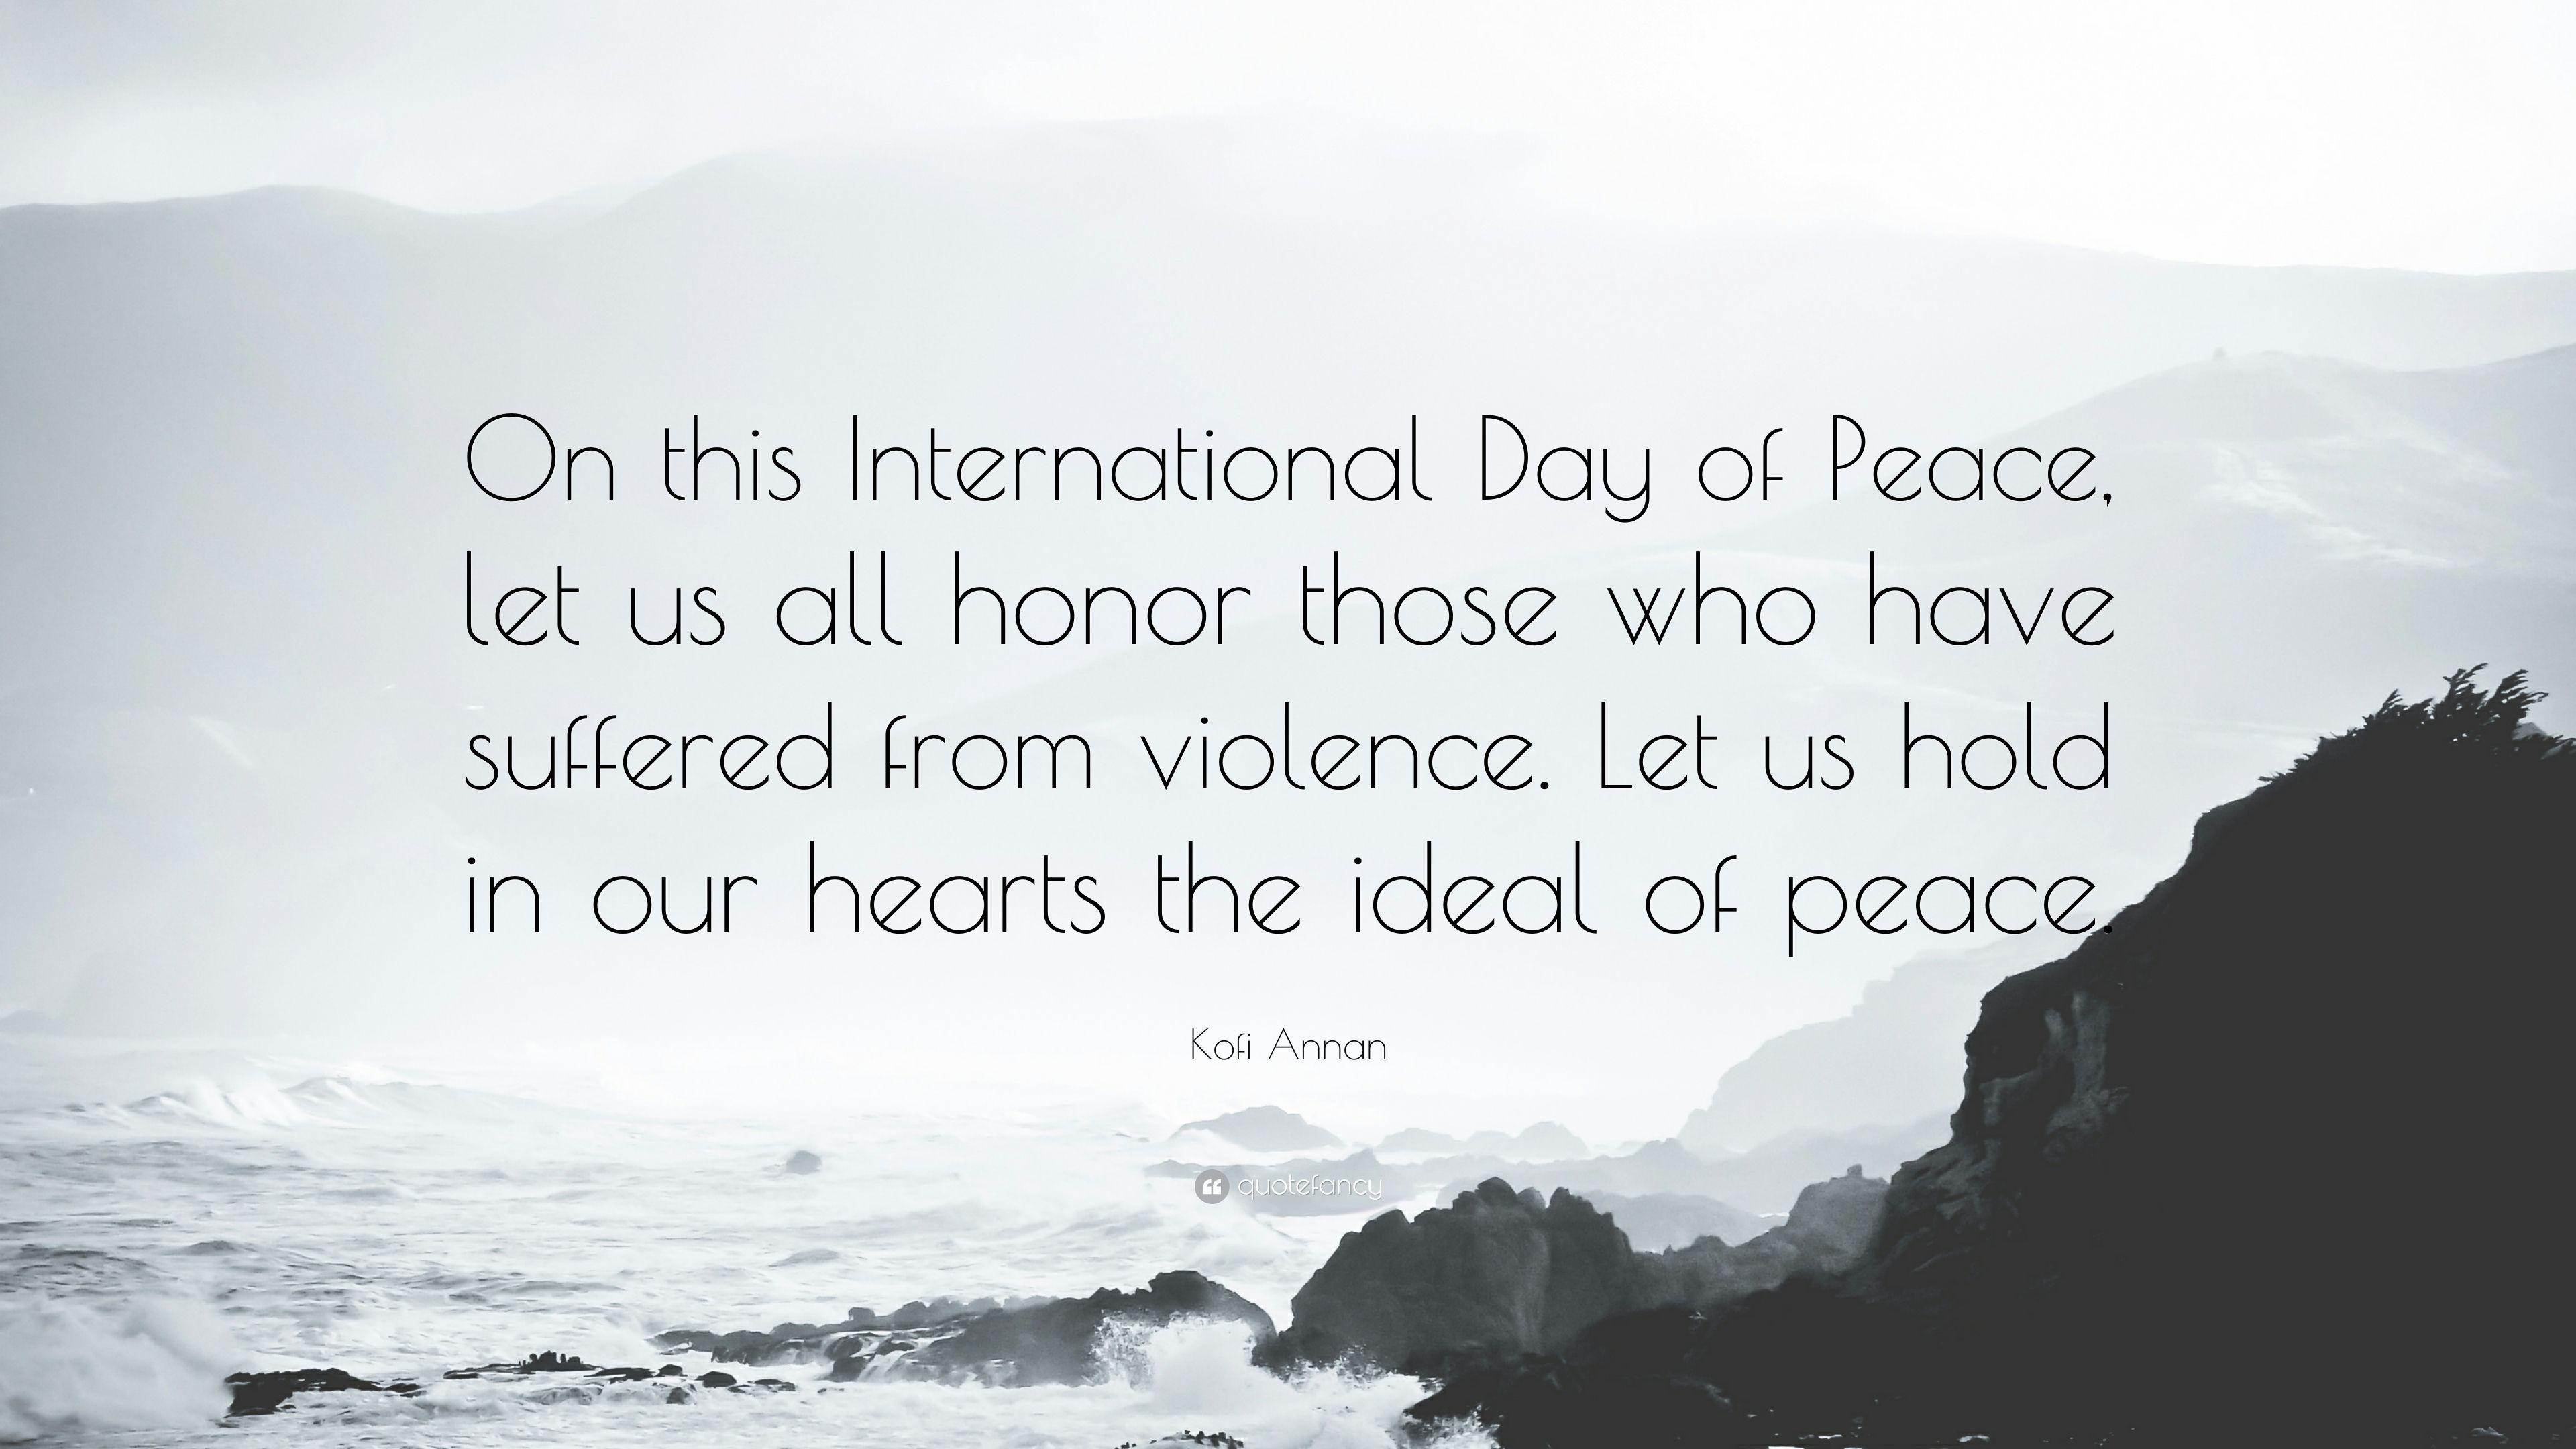 Kofi Annan Quote: “On this International Day of Peace, let us all